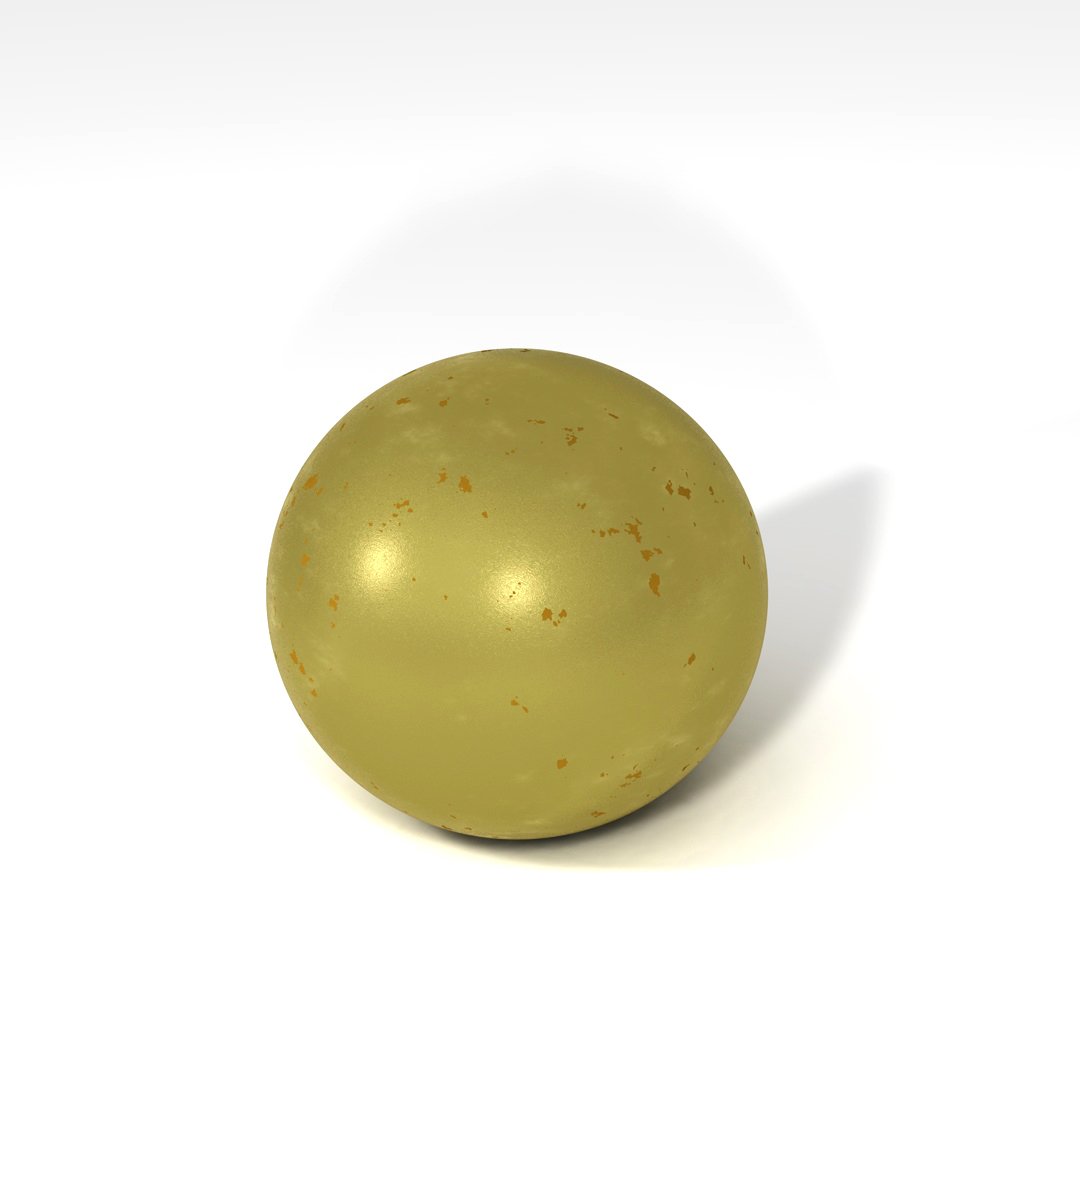 a round yellow object on a white surface